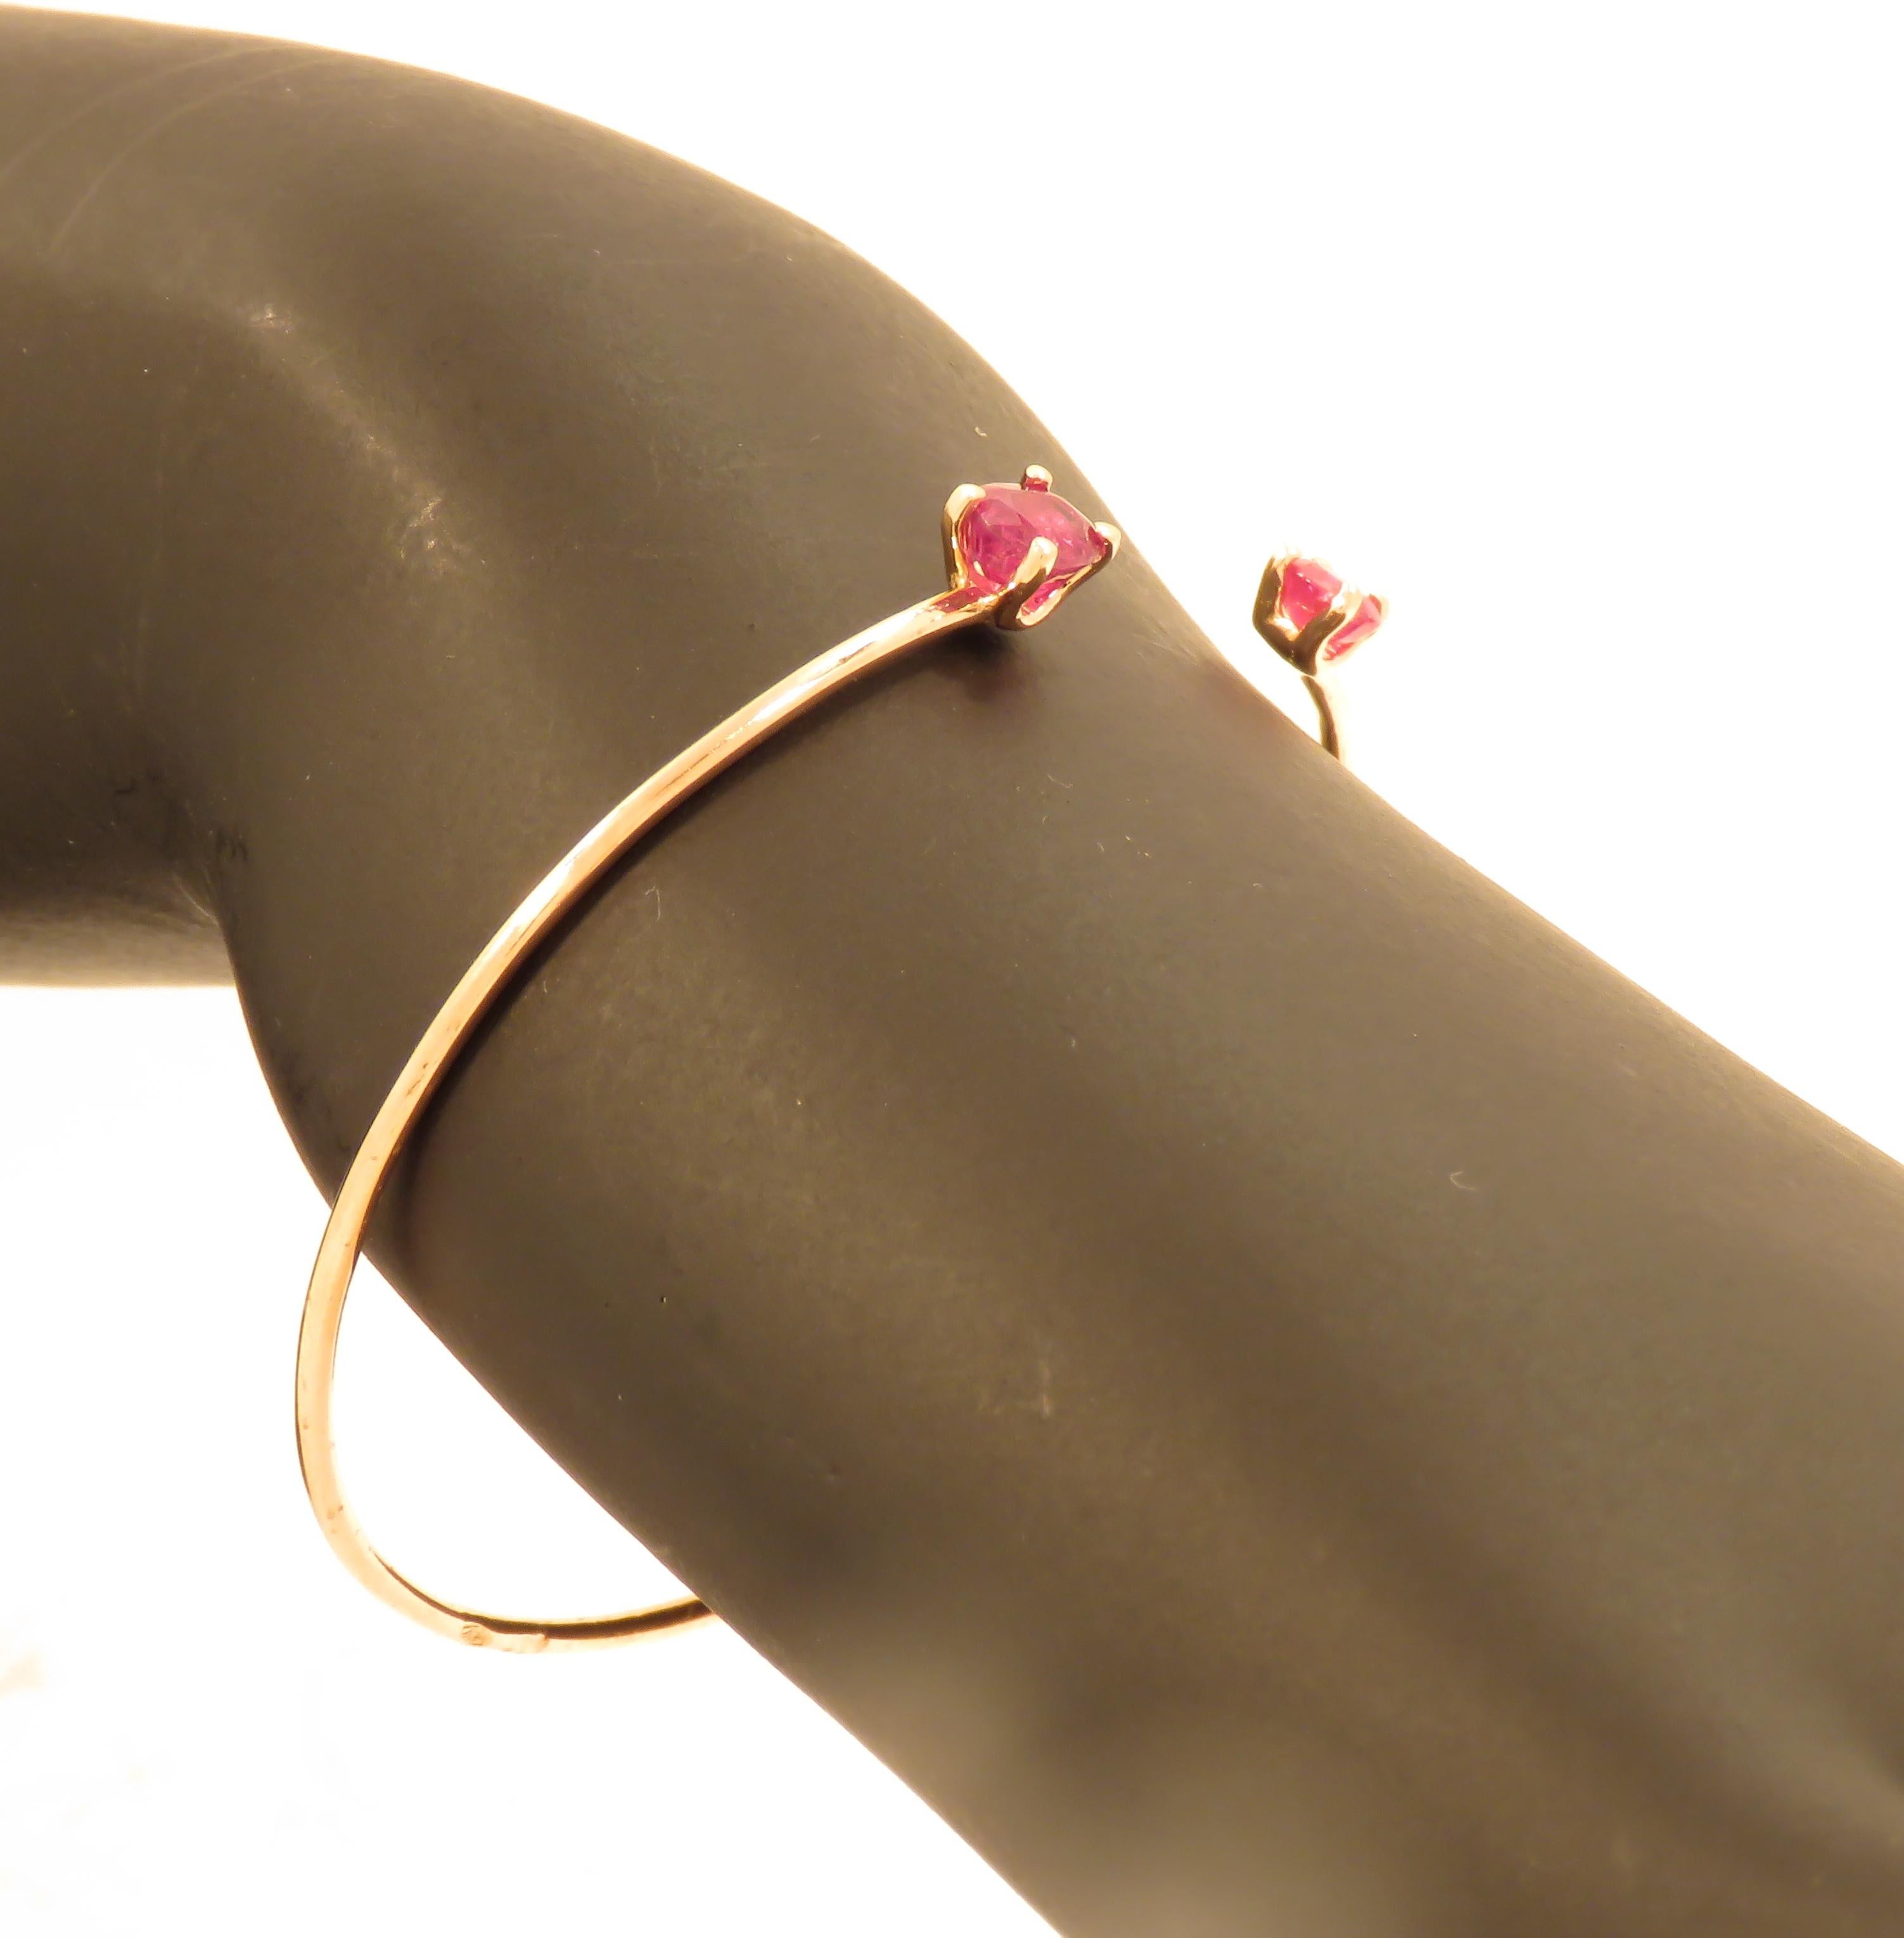 Cuff Bracelet Rubies 9 Karat Rose Gold Handcrafted in Italy For Sale 2